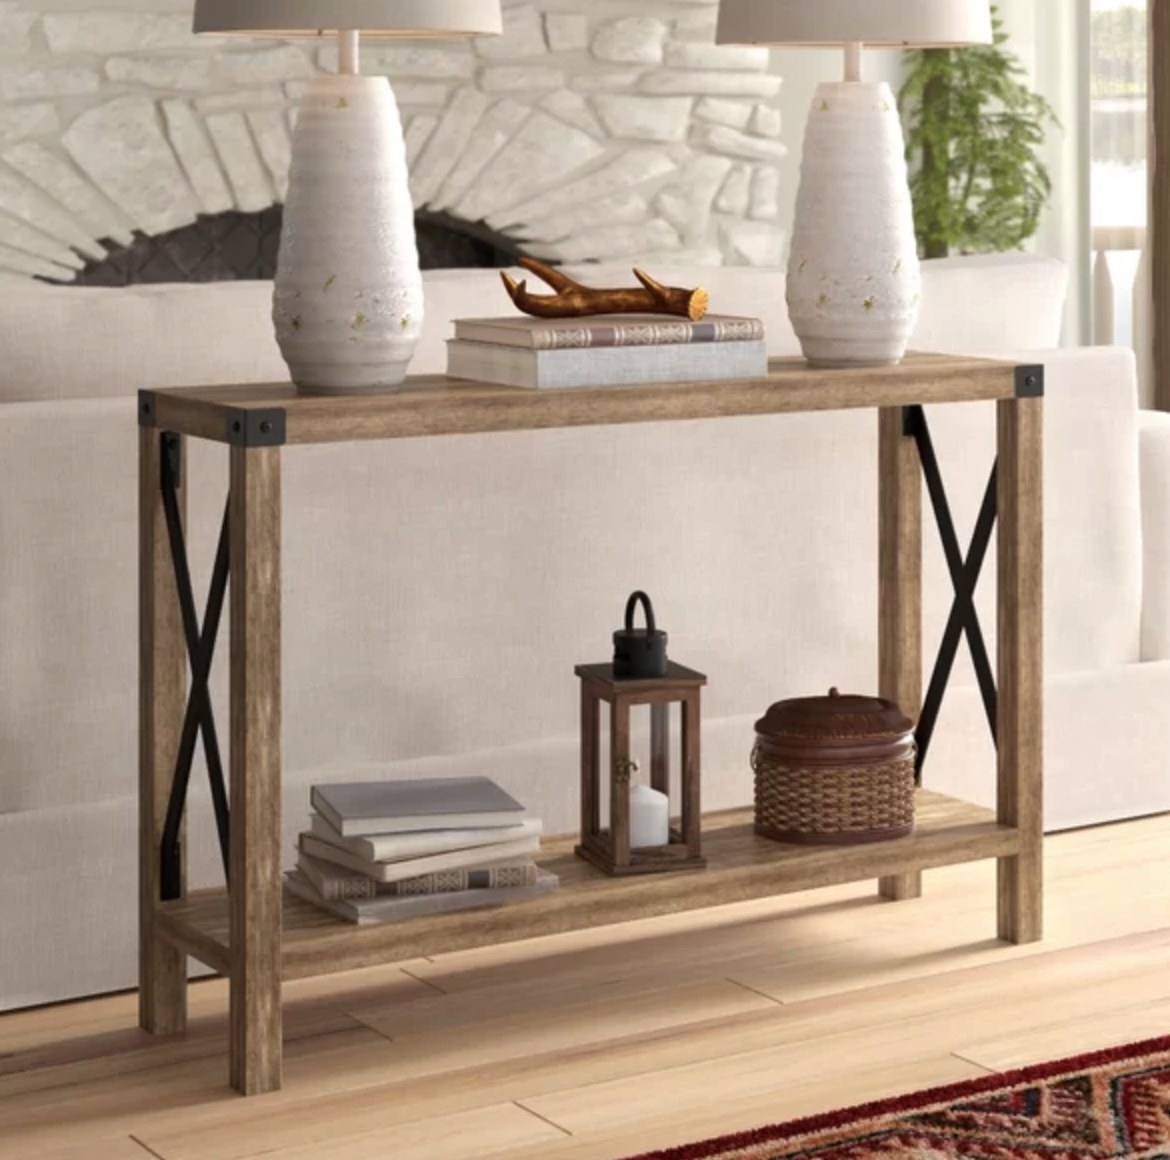 the wooden console table